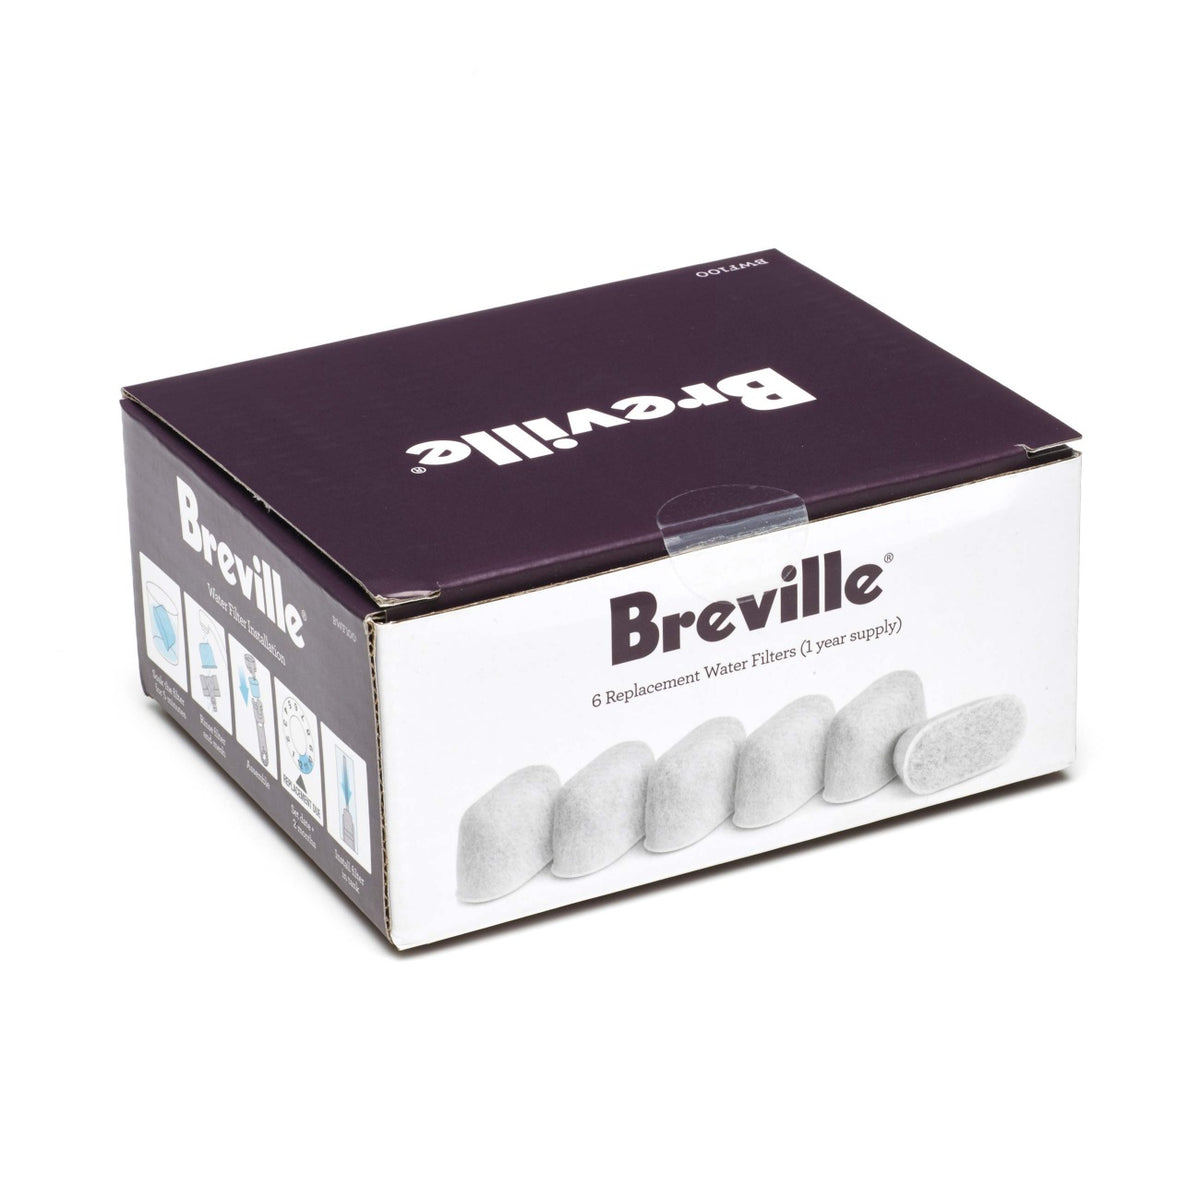 Breville 6 Replacement Water Filters